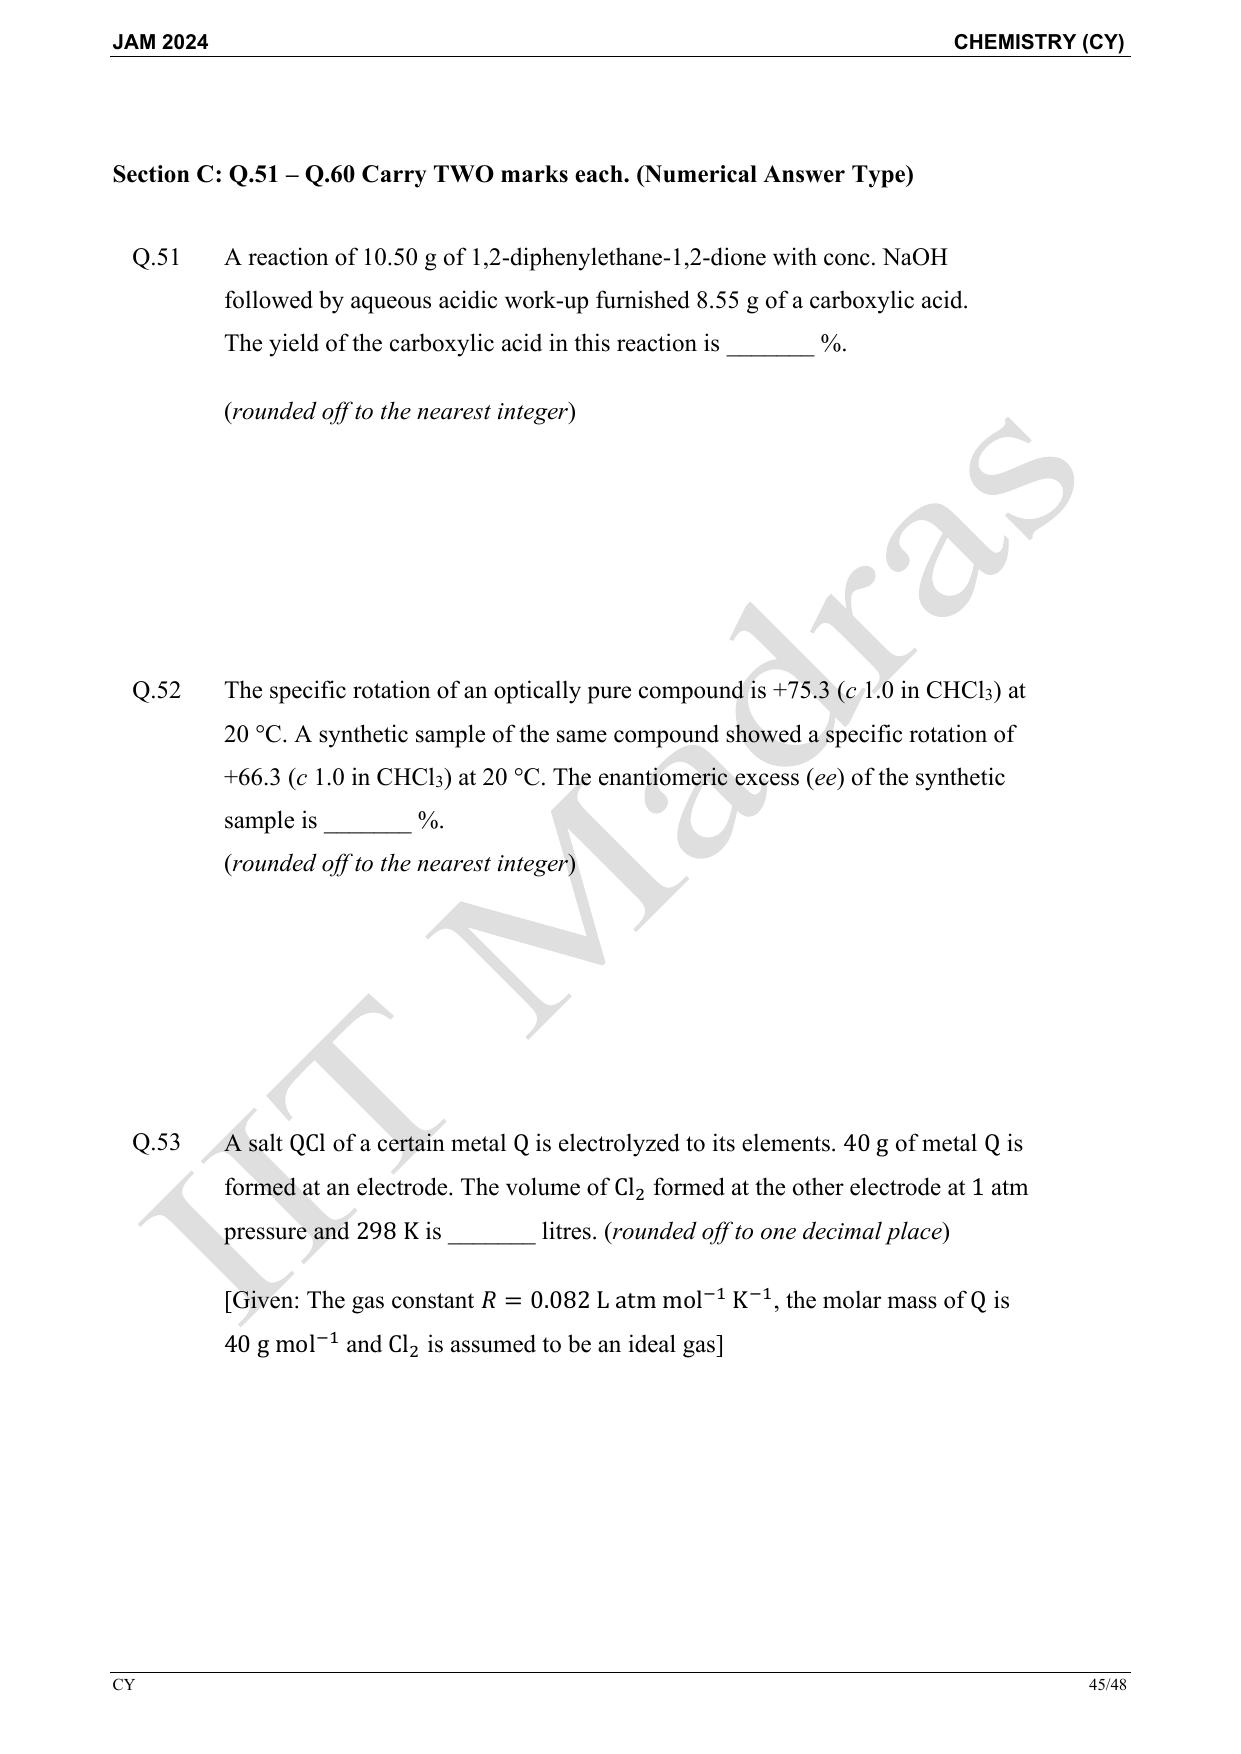 IIT JAM 2024 Chemistry (CY) Master Question Paper - Page 45